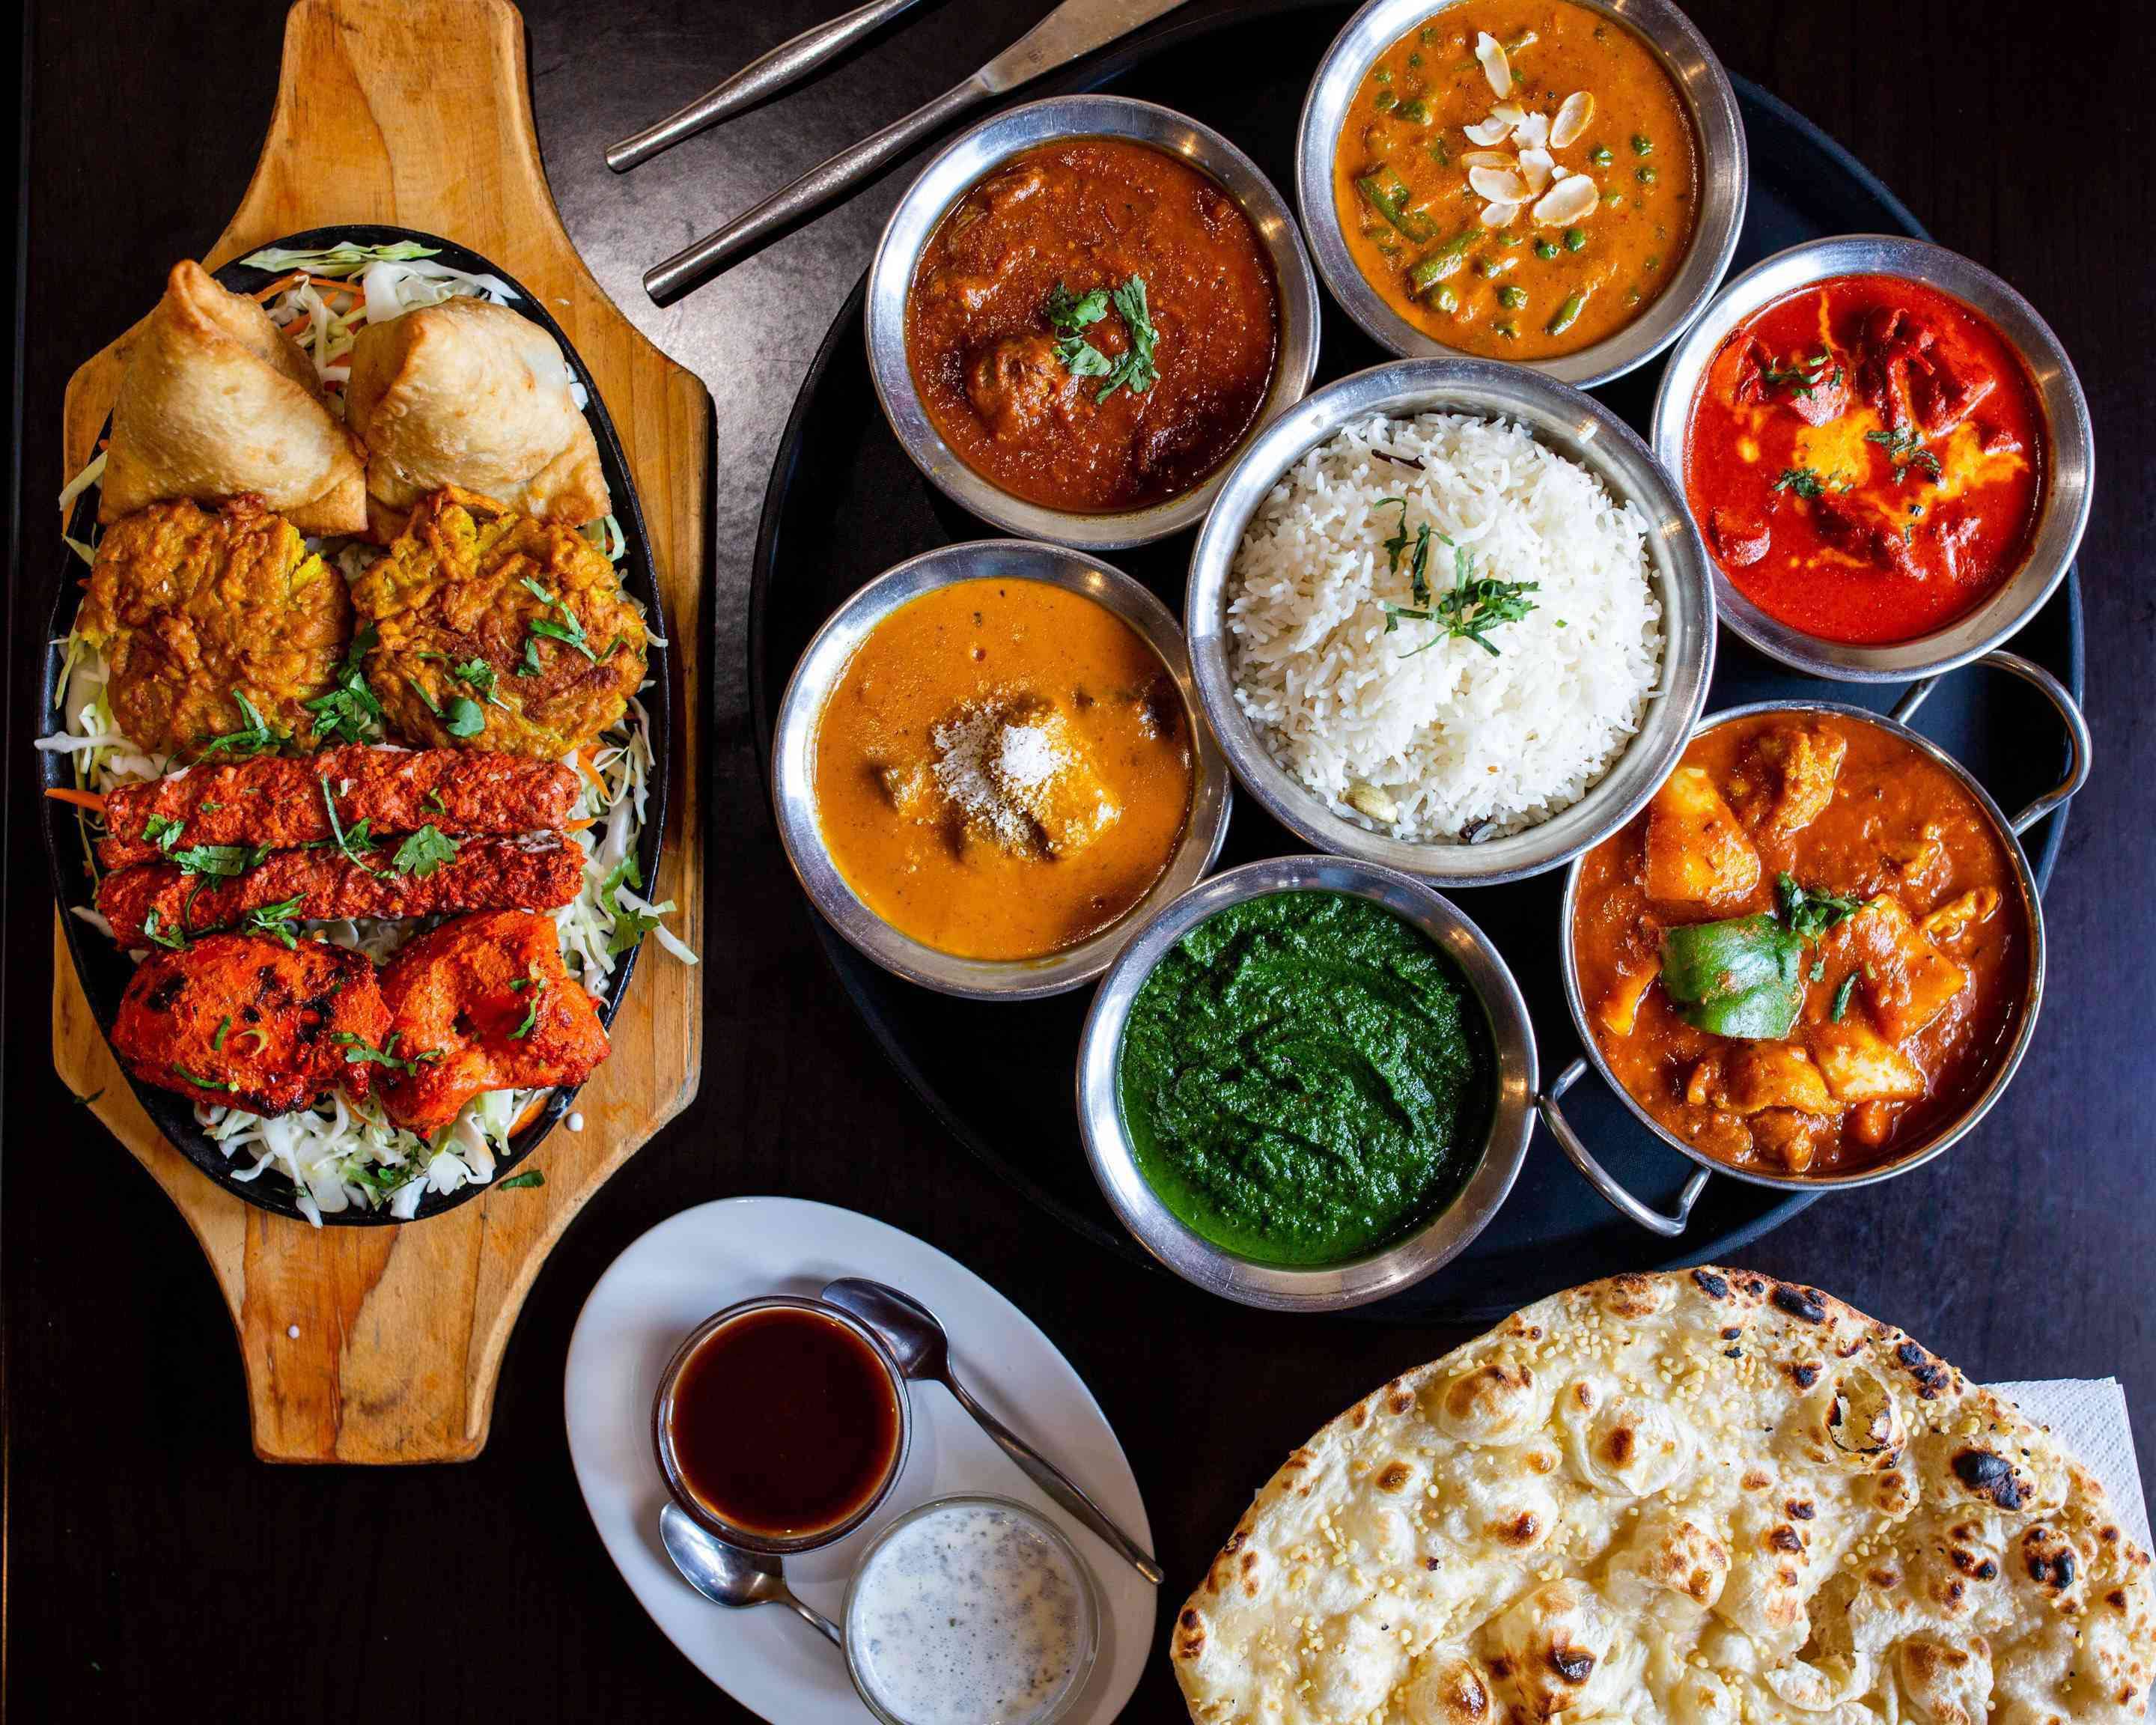 Masala Indian Cuisine Menu Takeout in Townsville | Delivery Menu & Prices |  Uber Eats